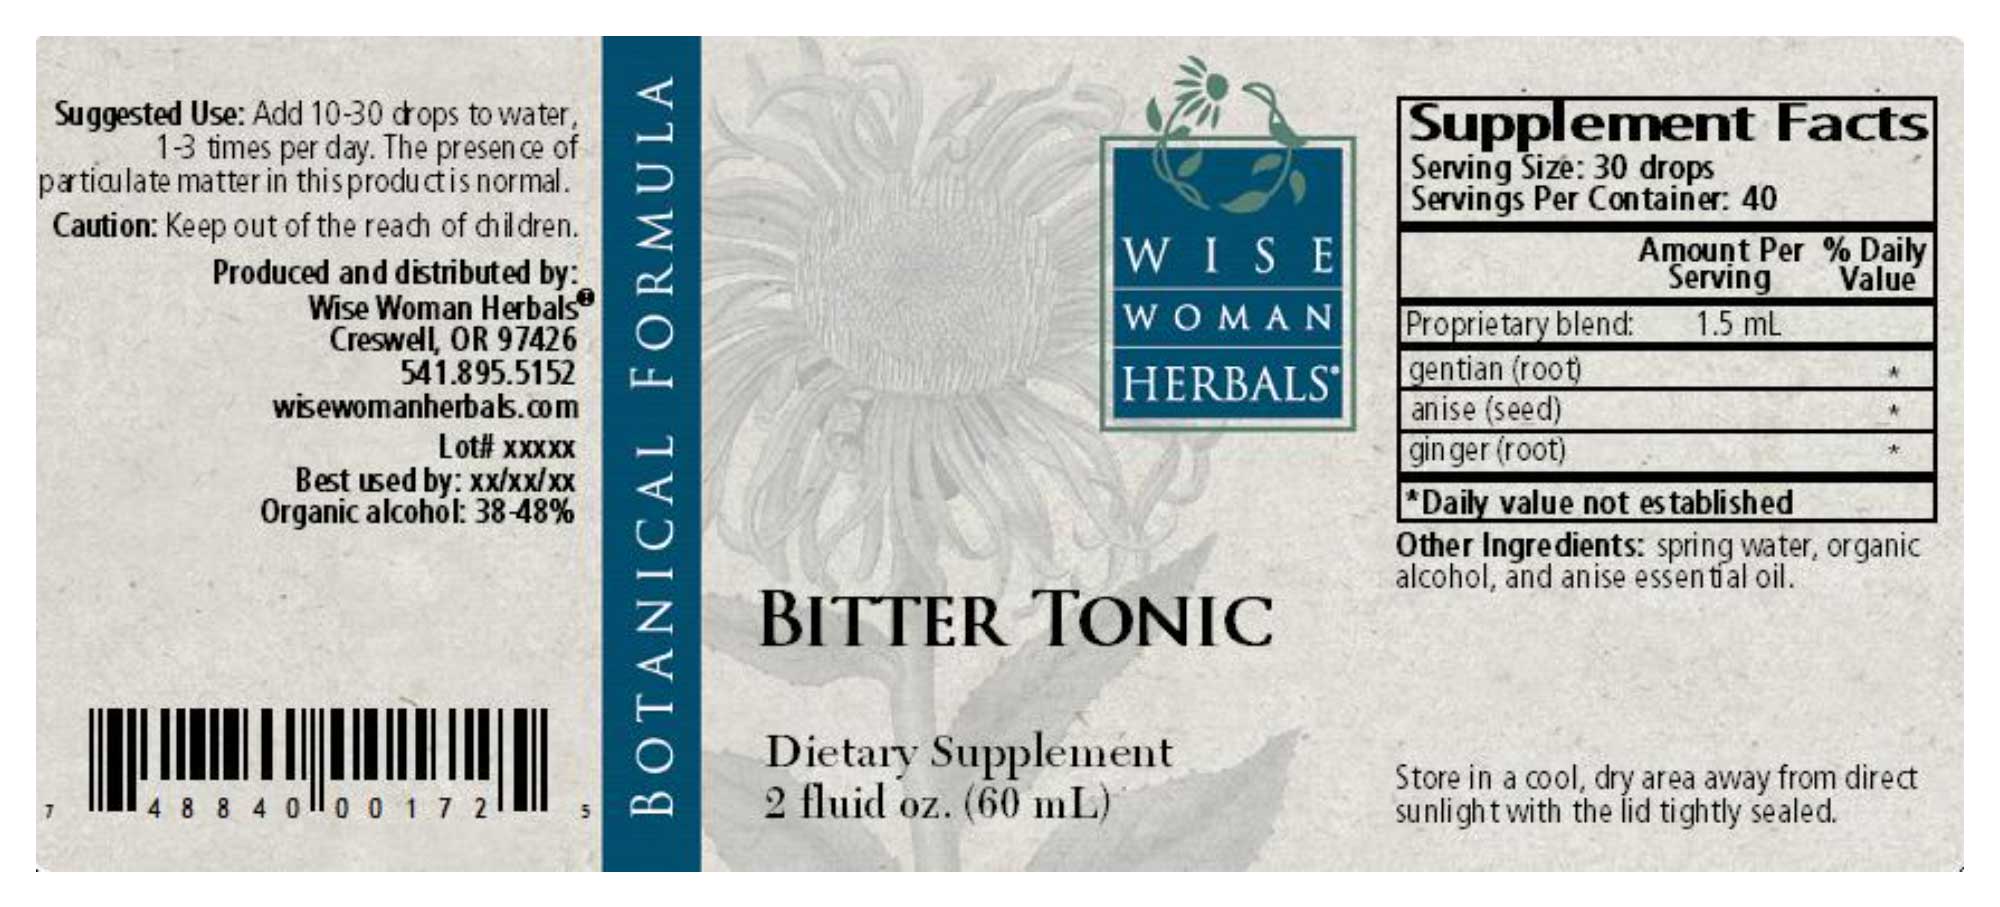 Wise Woman Herbals Bitter Tonic Label